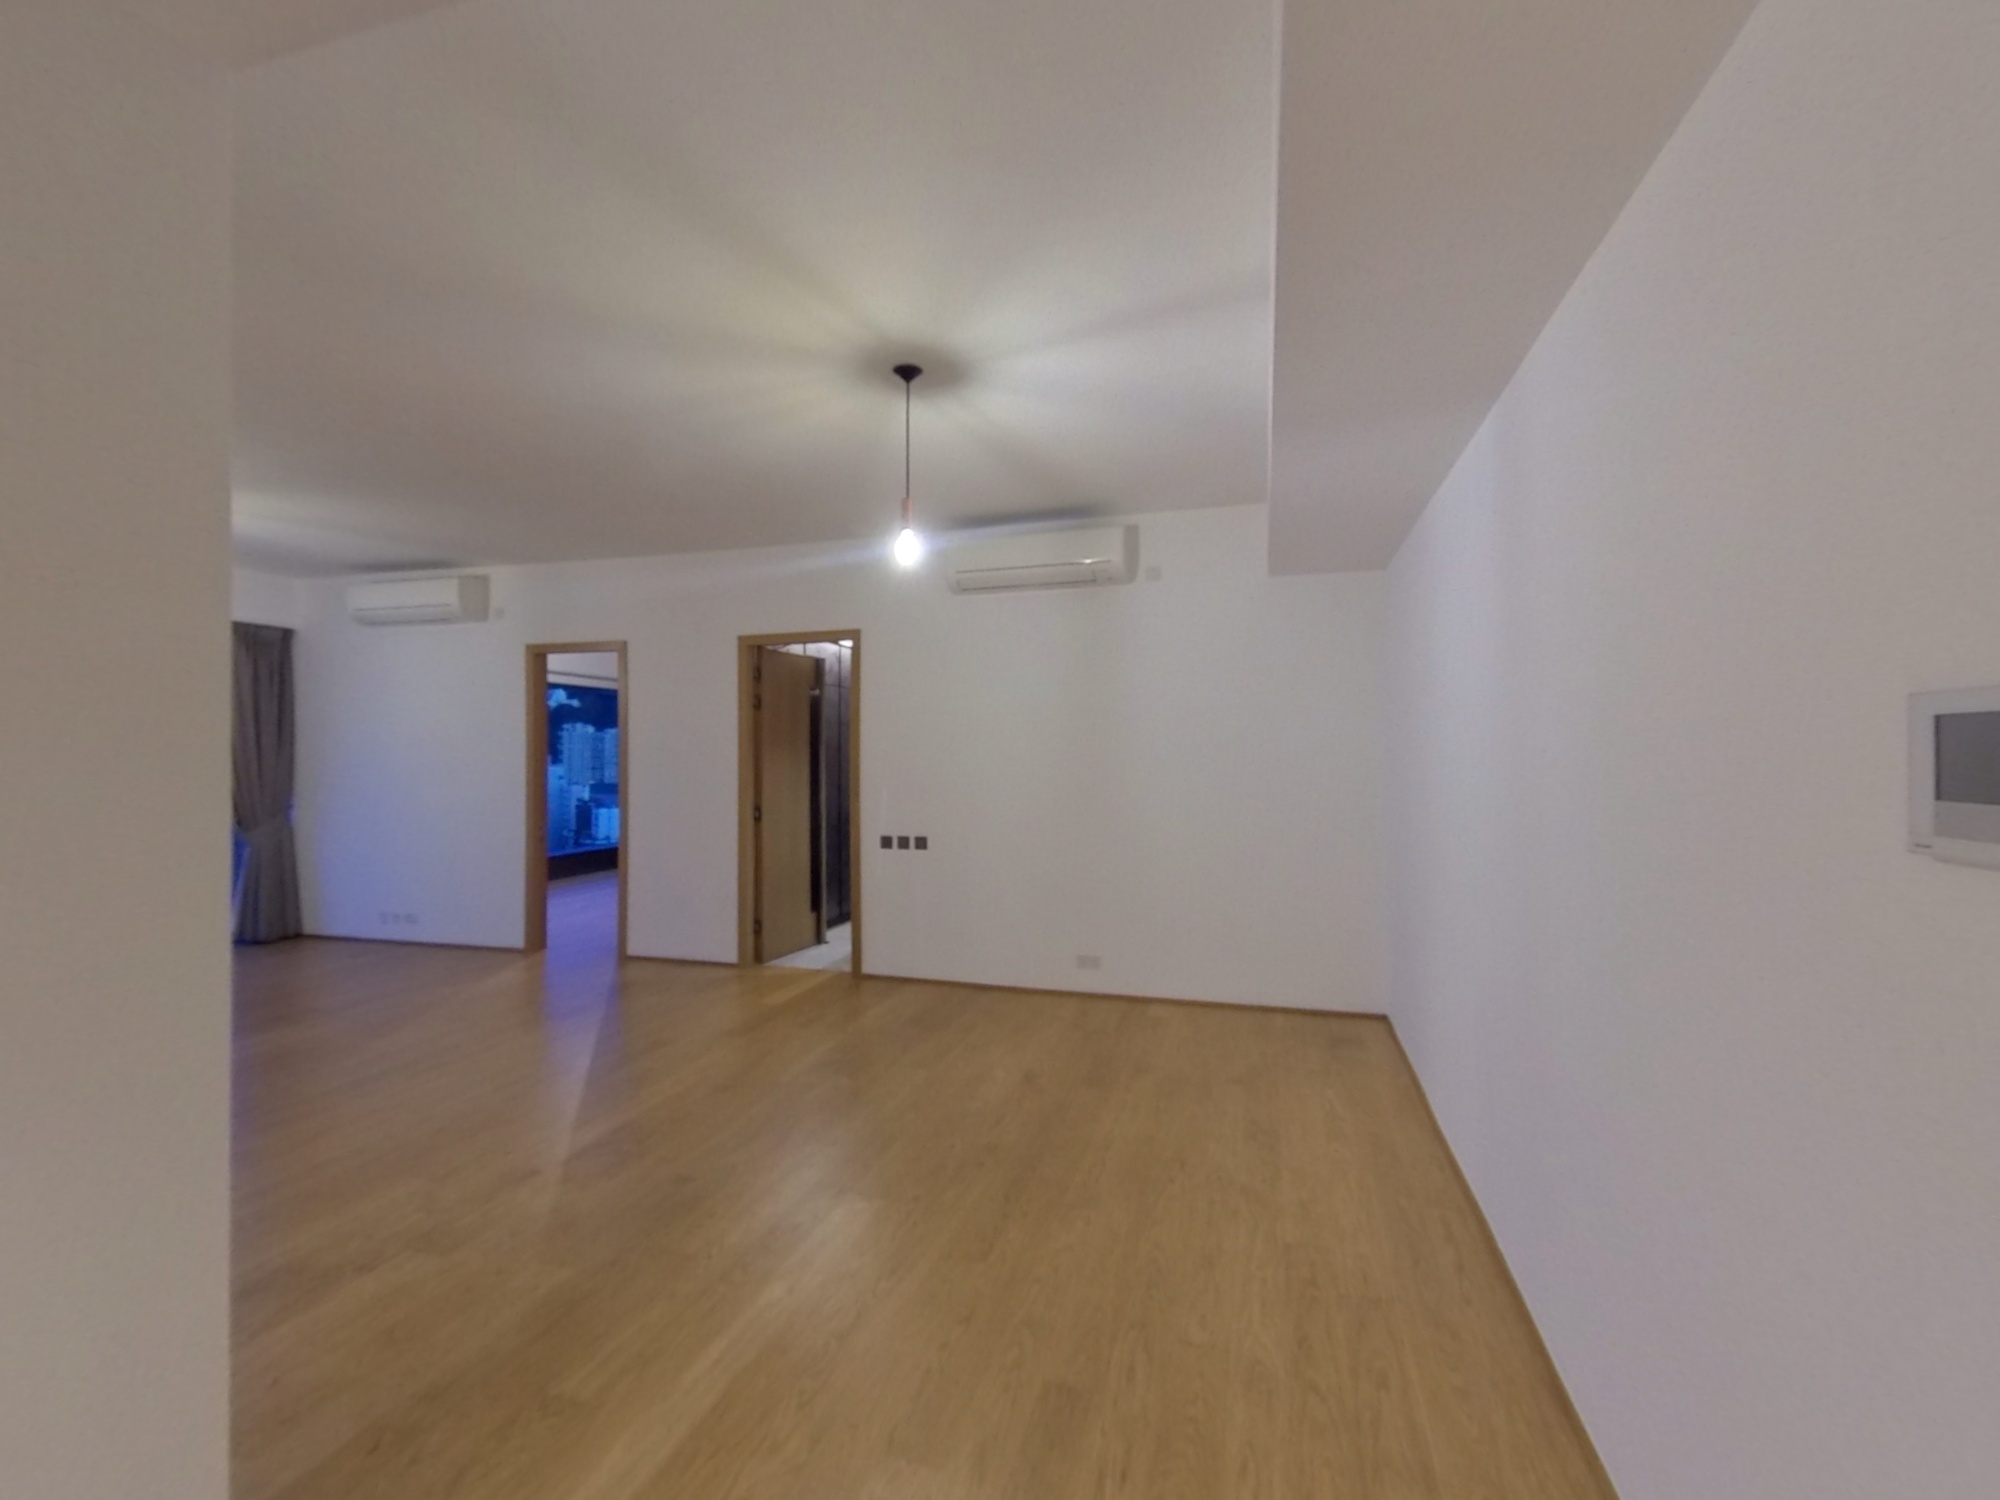 Mid-Levels West ALASSIO Upper Floor House730-6685534